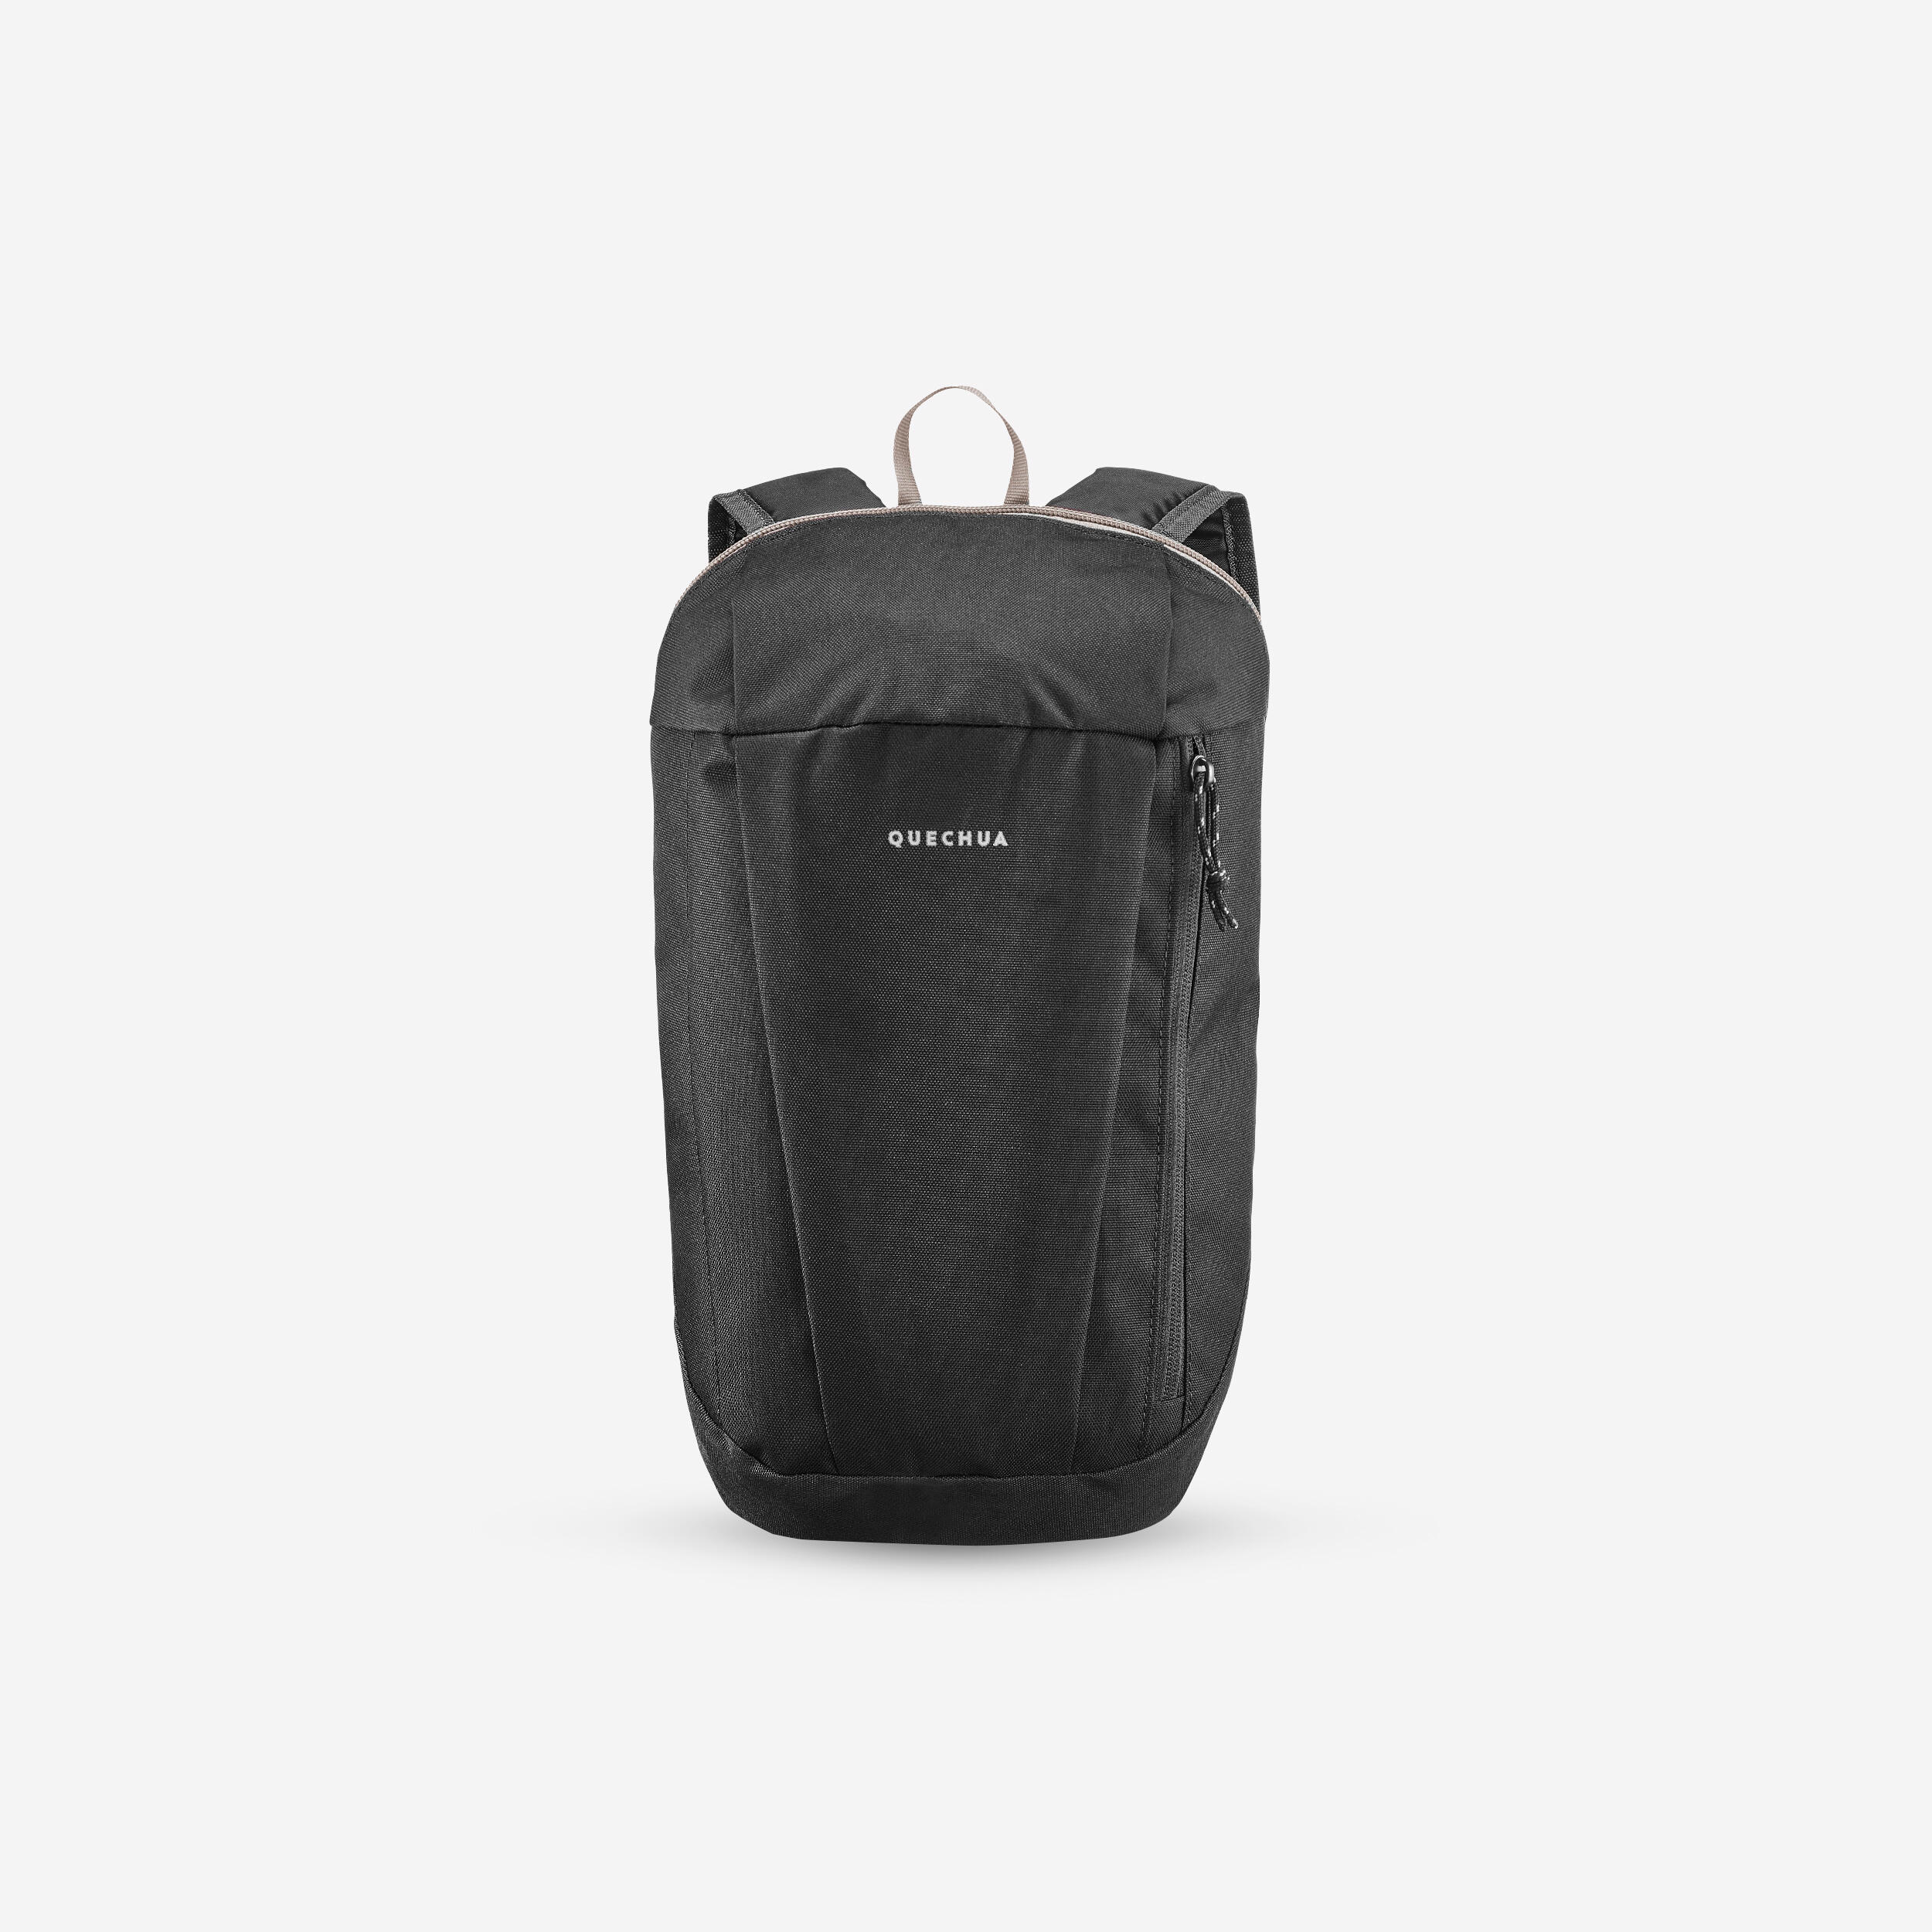 QUECHUA Hiking Backpack 10 L - NH Arpenaz 50